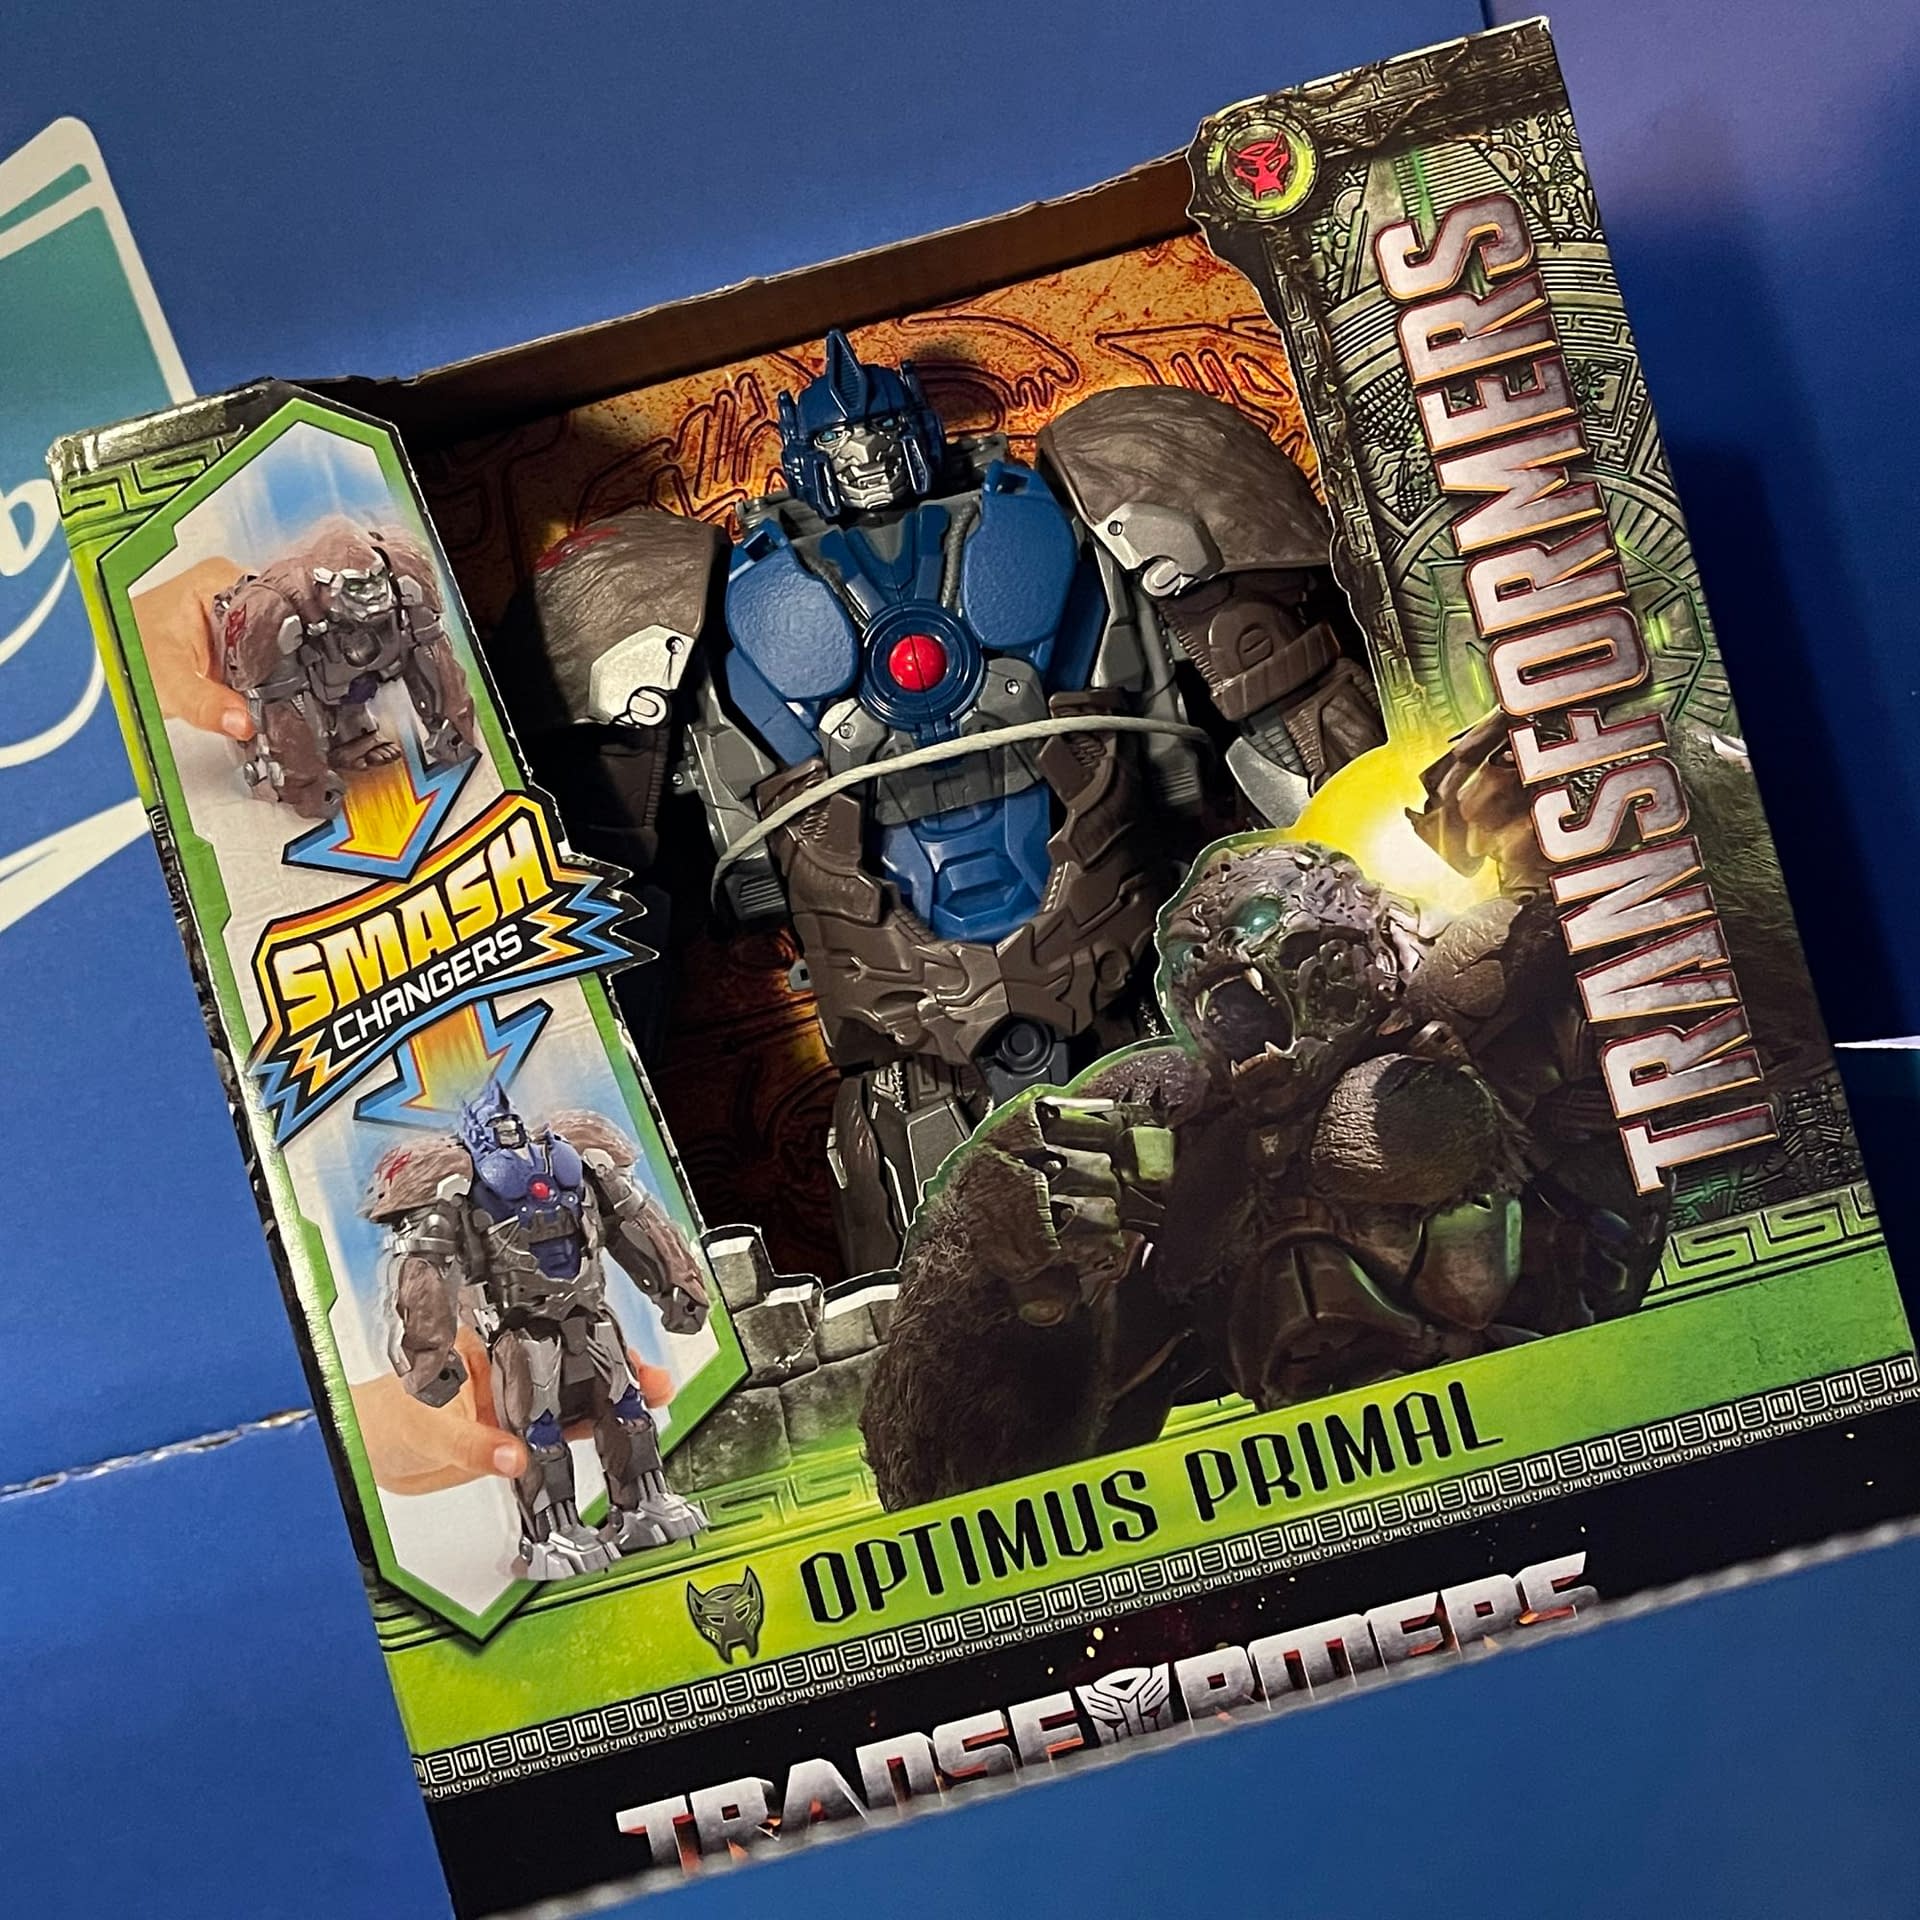 Hasbro Gets Into the Spring Spirit with Plenty of New Releases for All